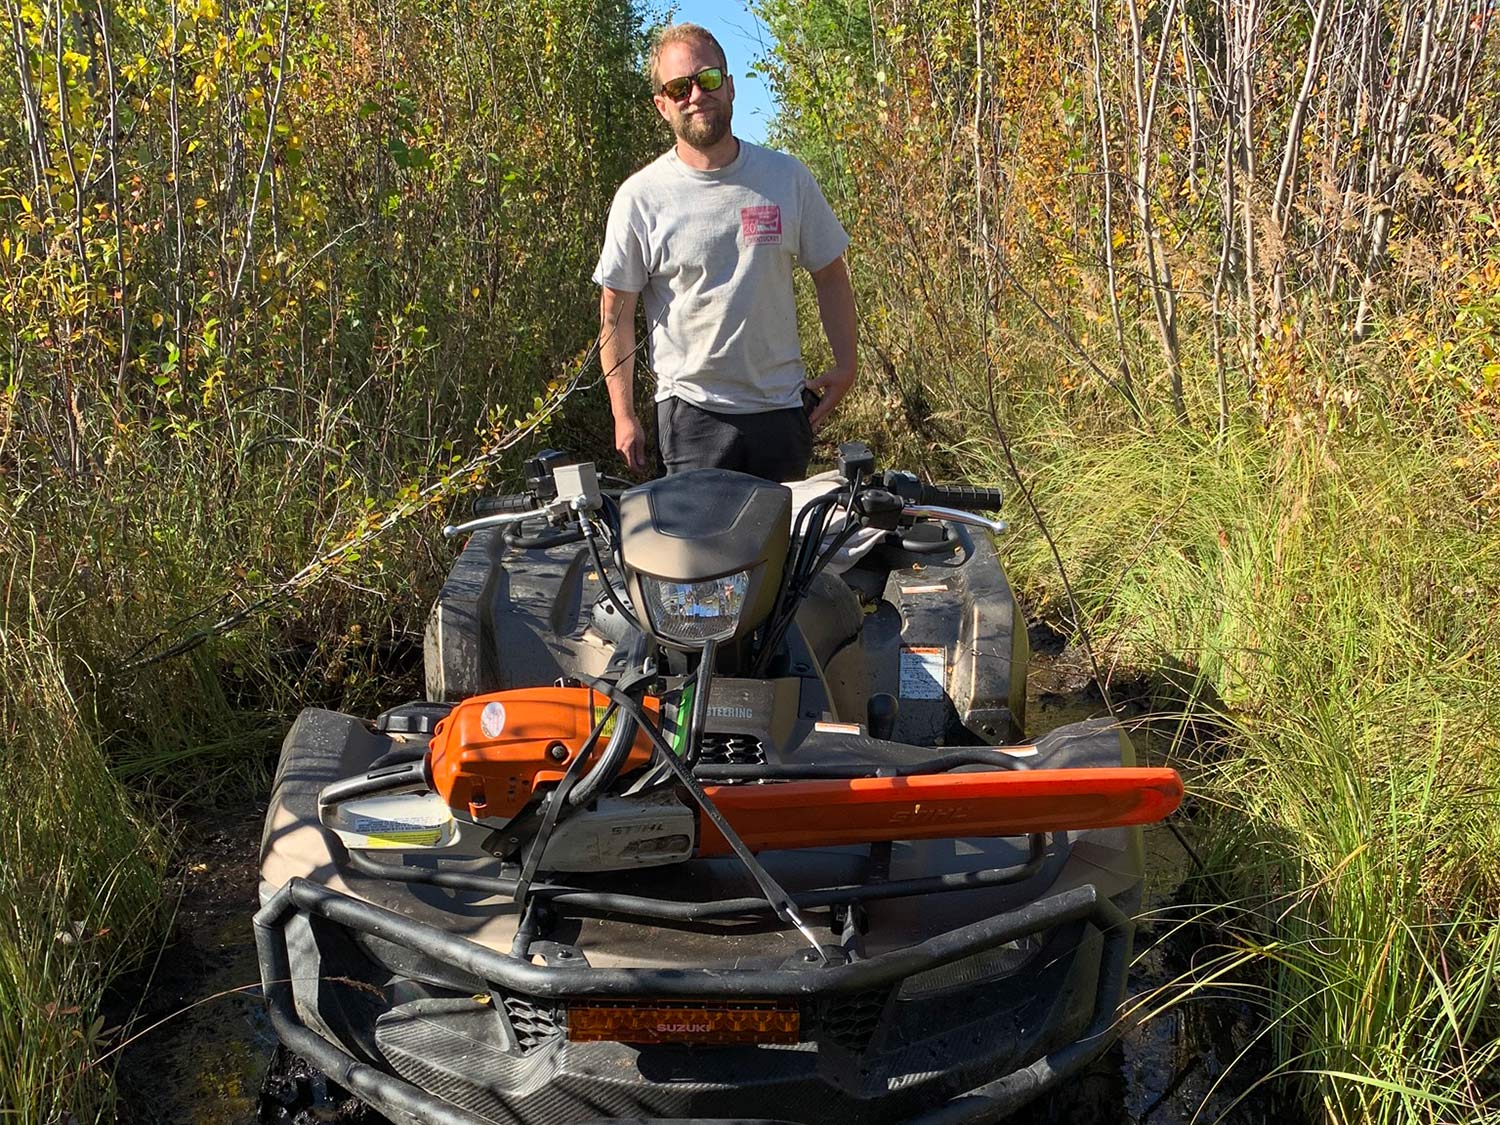 A man stands behind a four-wheeled ATV in very dense brush and woods, on a hunting trail.